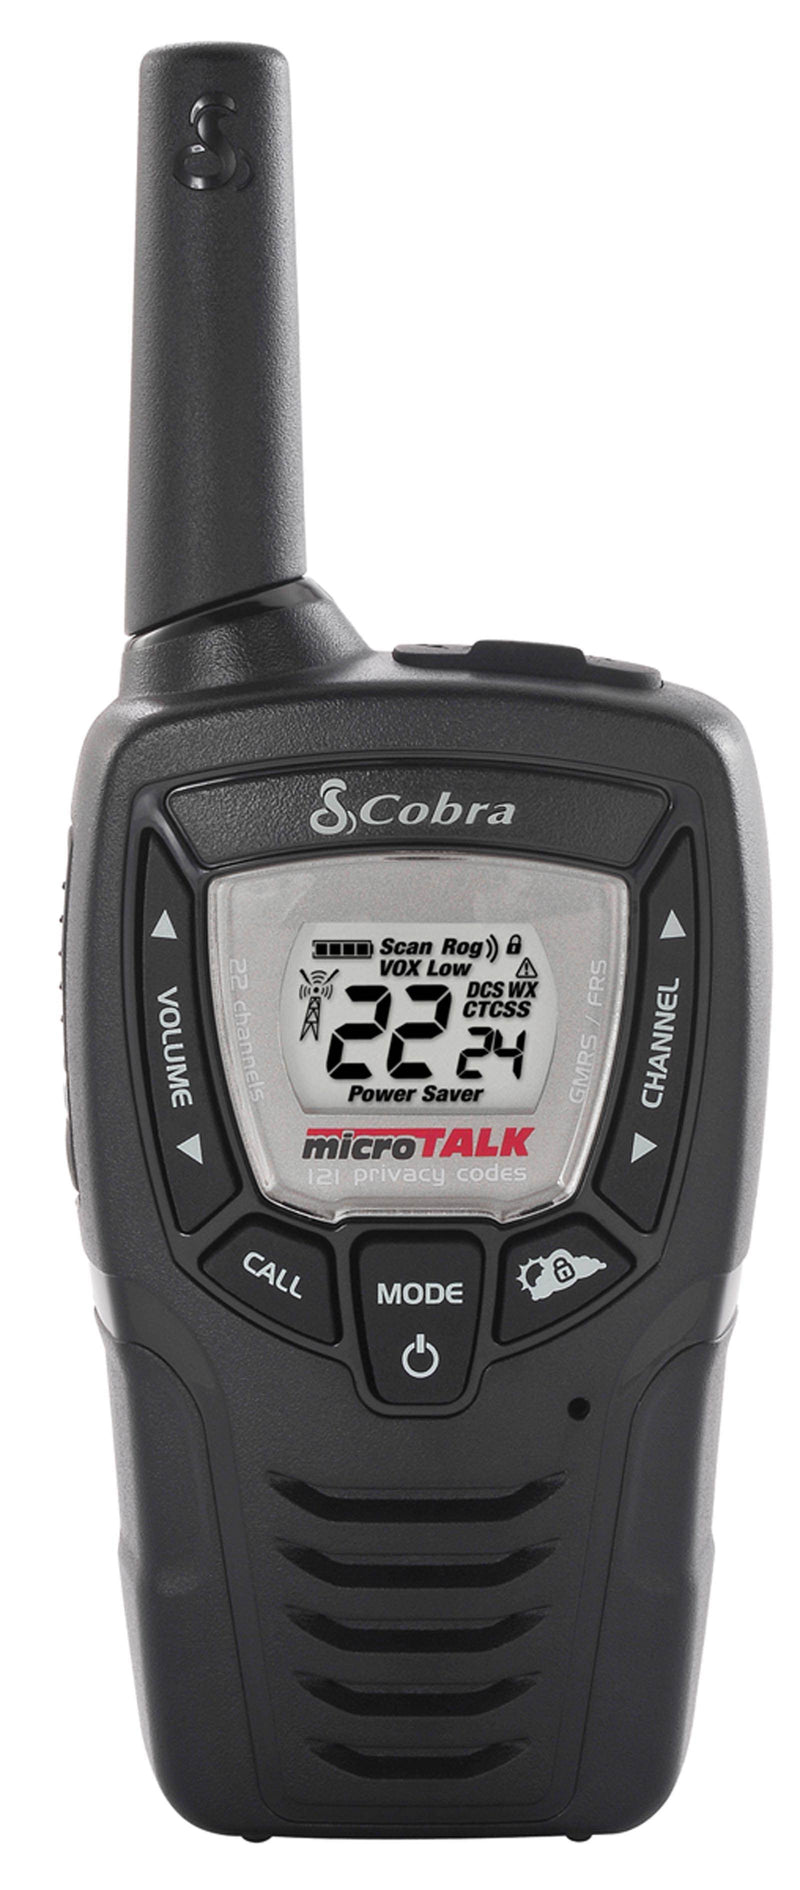 8 COBRA CXT345 MicroTalk 23 Mile FRS/GMRS 22 Channel Walkie Talkie 2-Way Radios